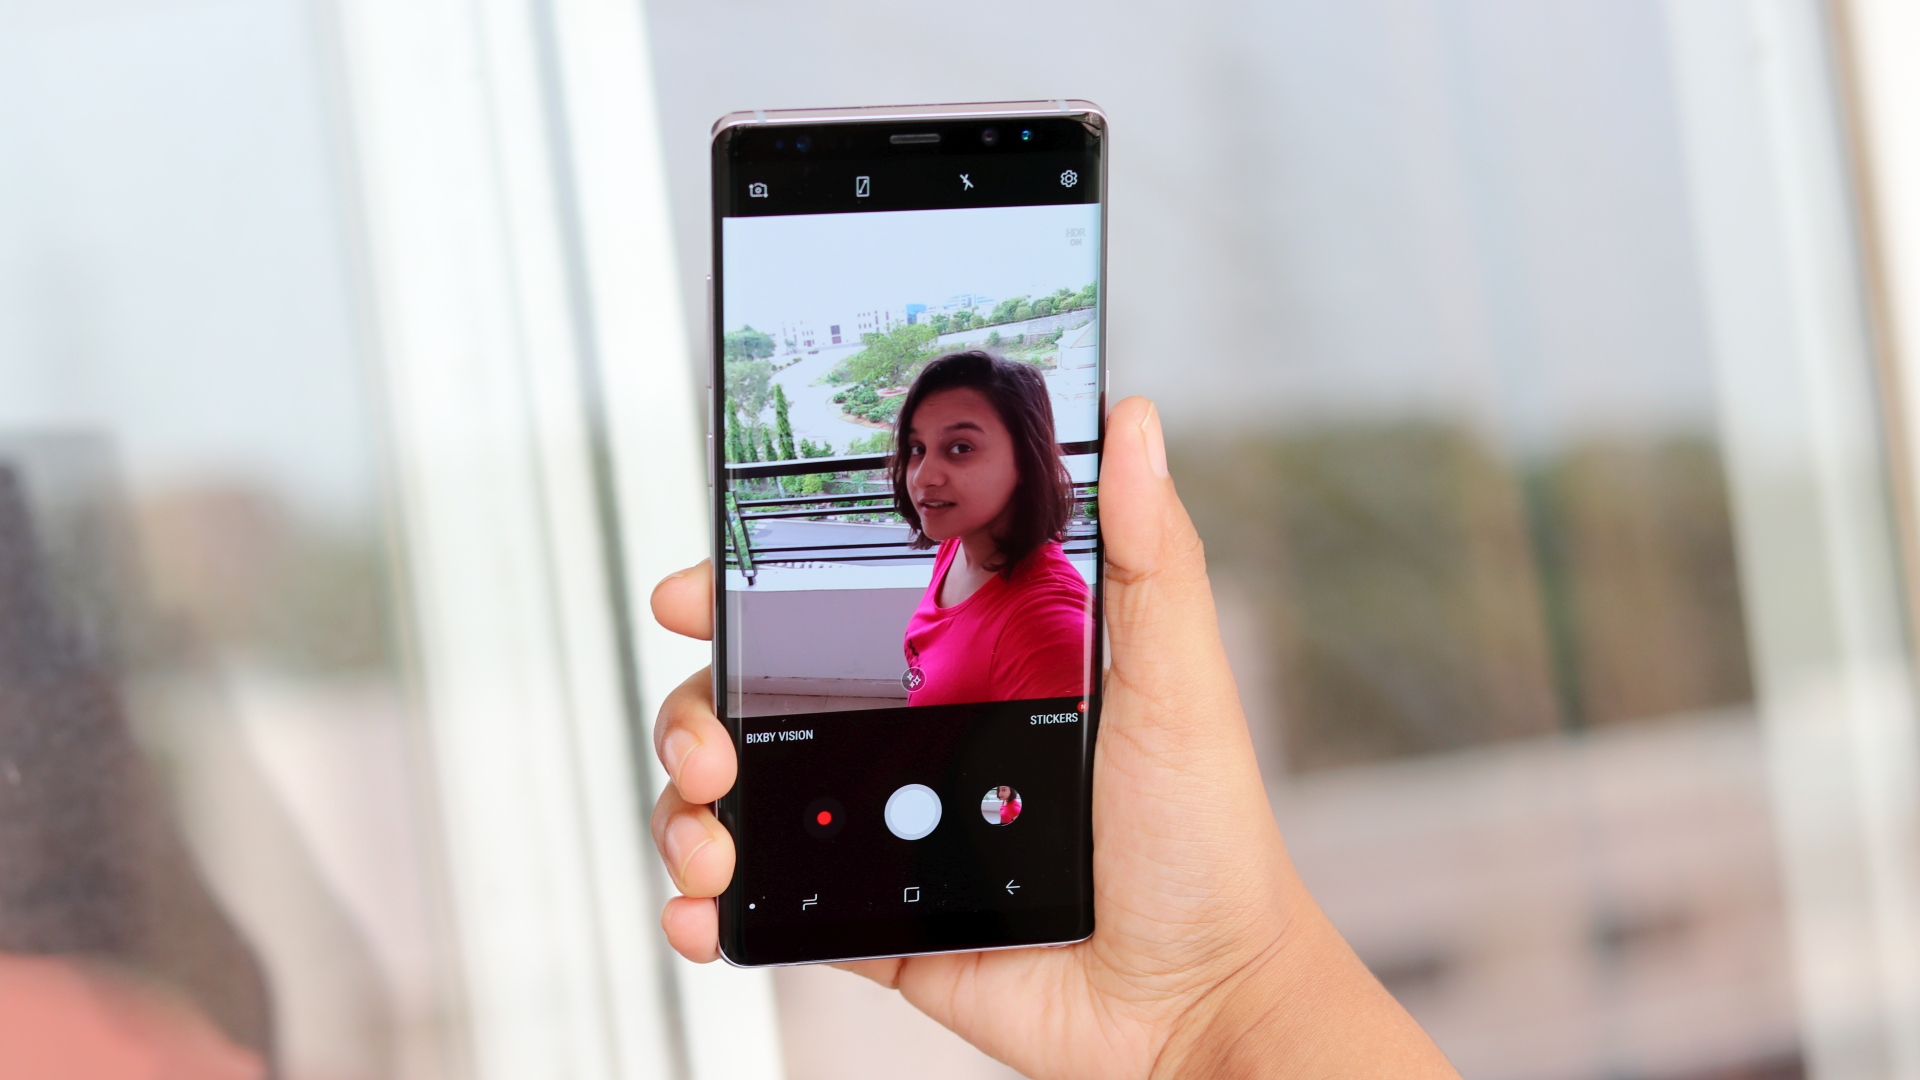 Do you like the selfie camera on Samsung's current